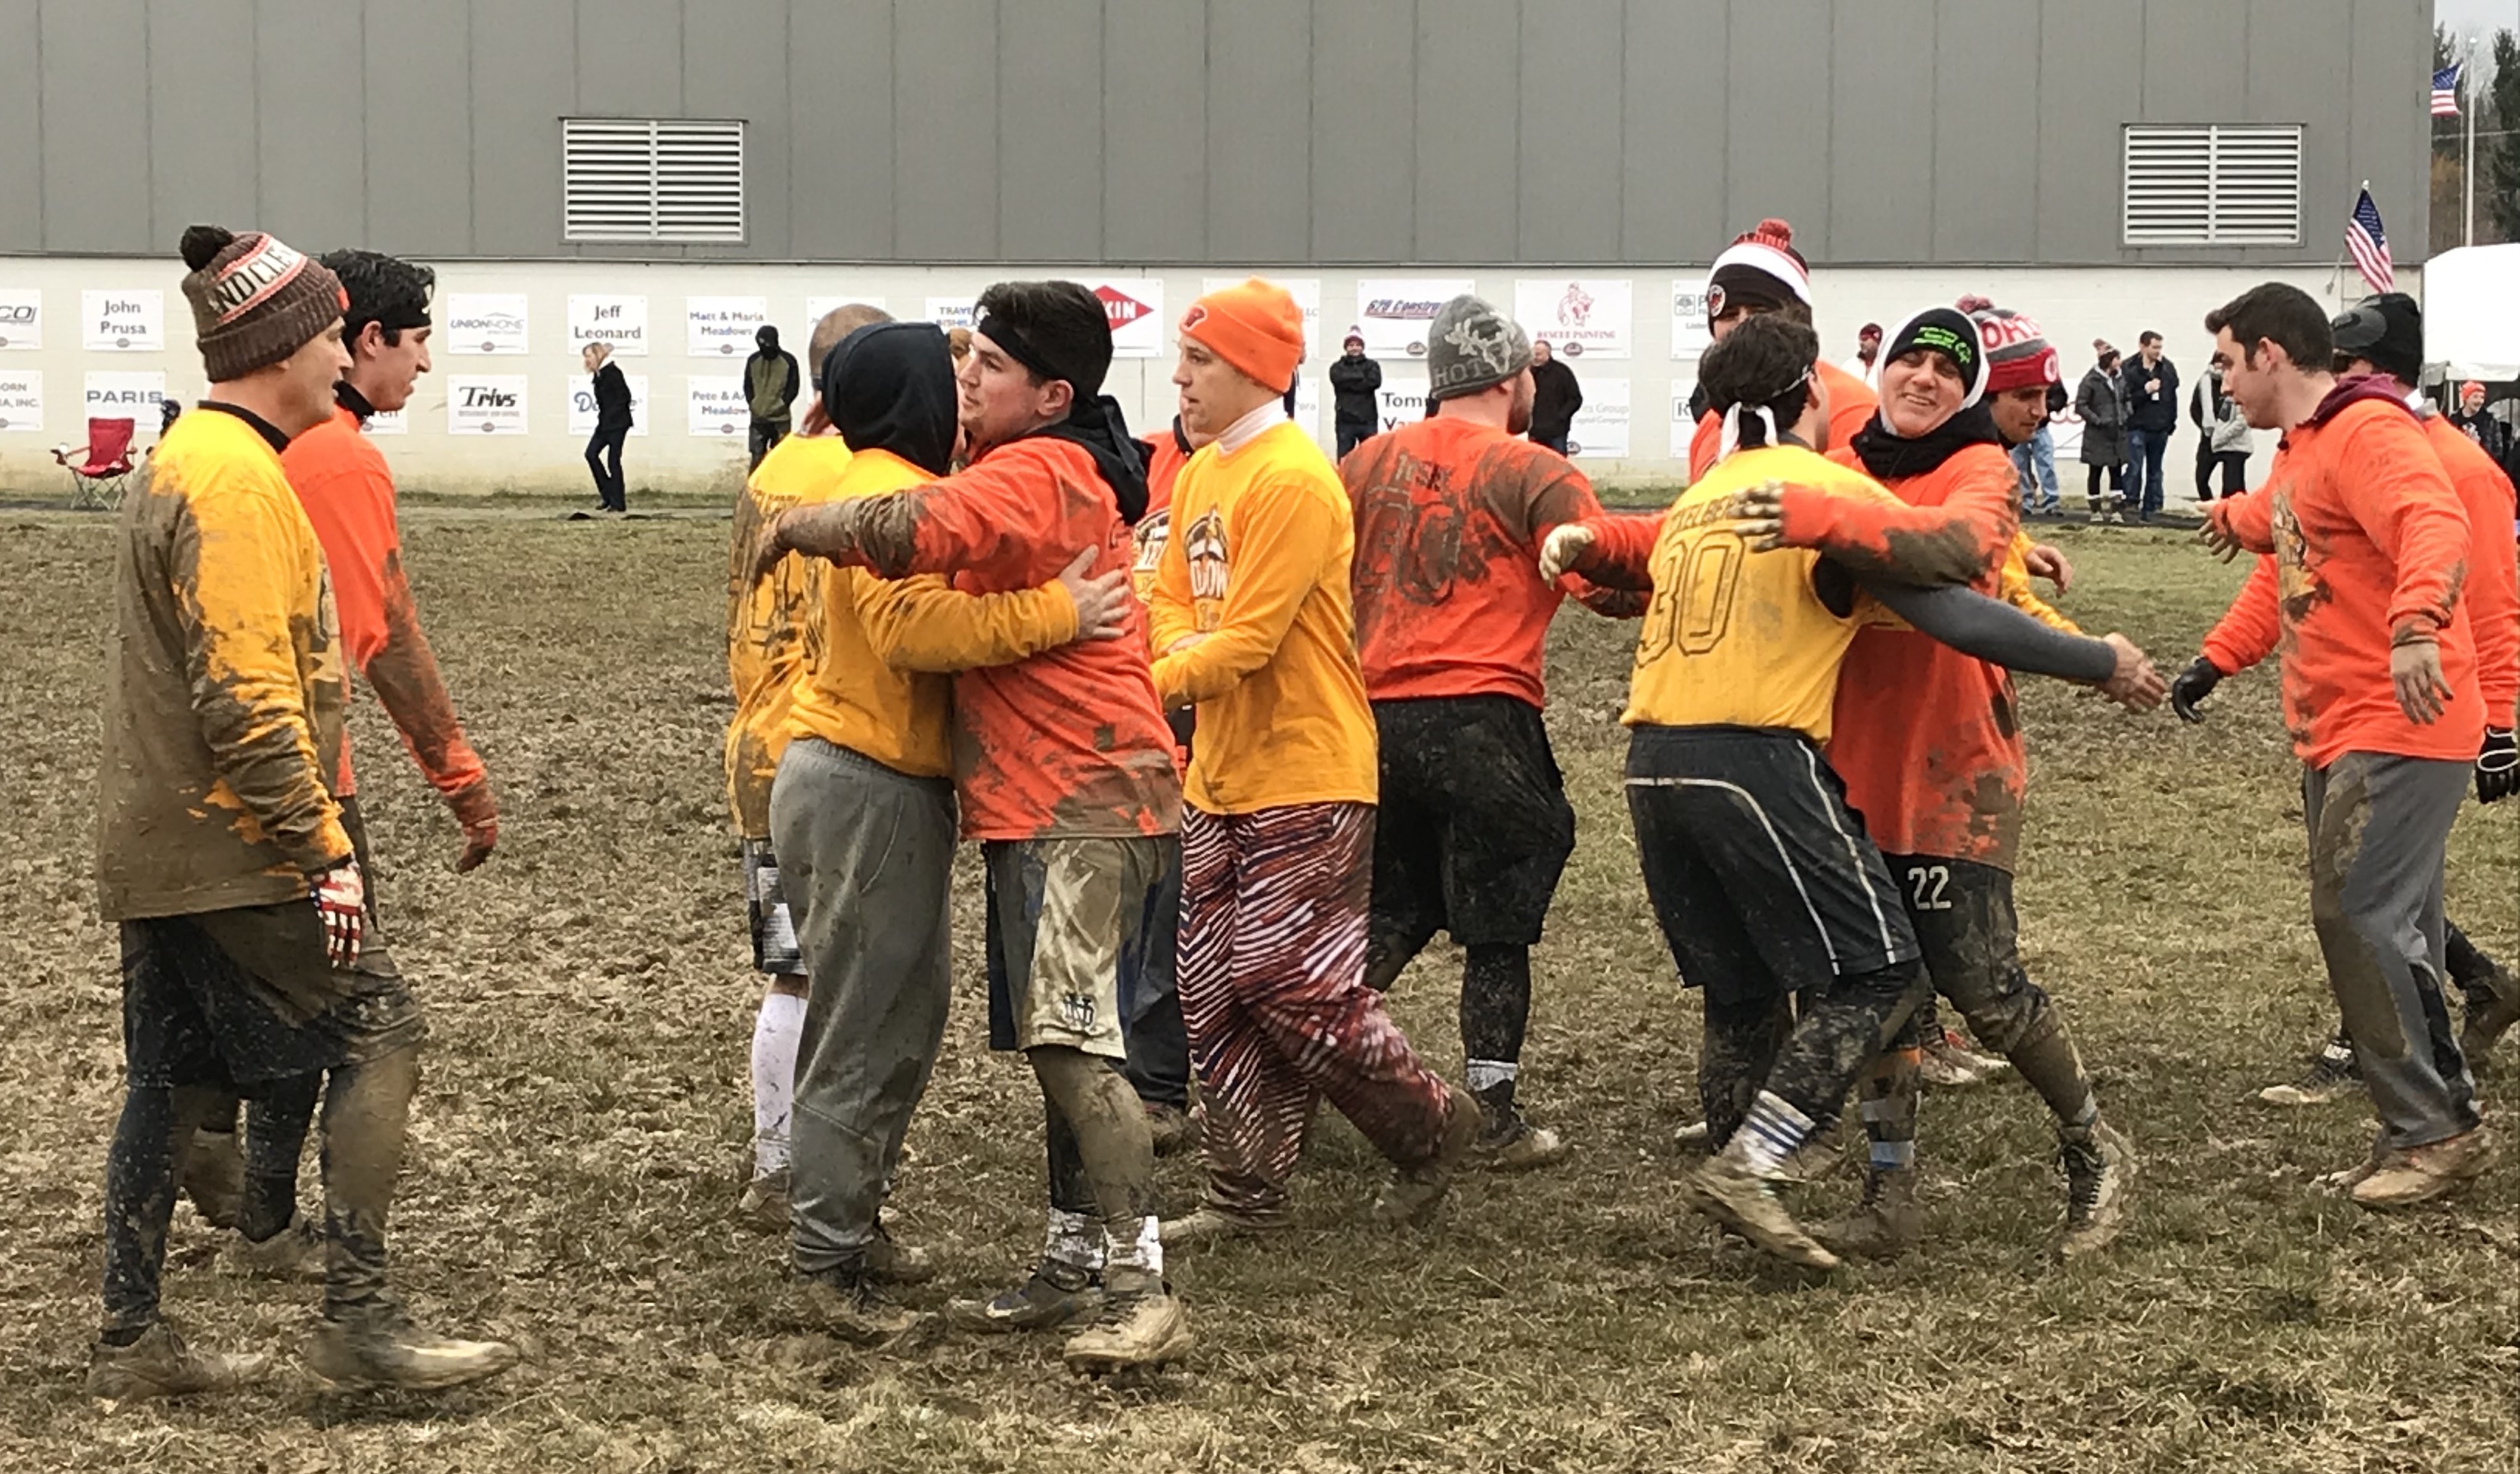 Meadows Turkey Bowl ready for 31st annual – and special - Thanksgiving Day  football game 